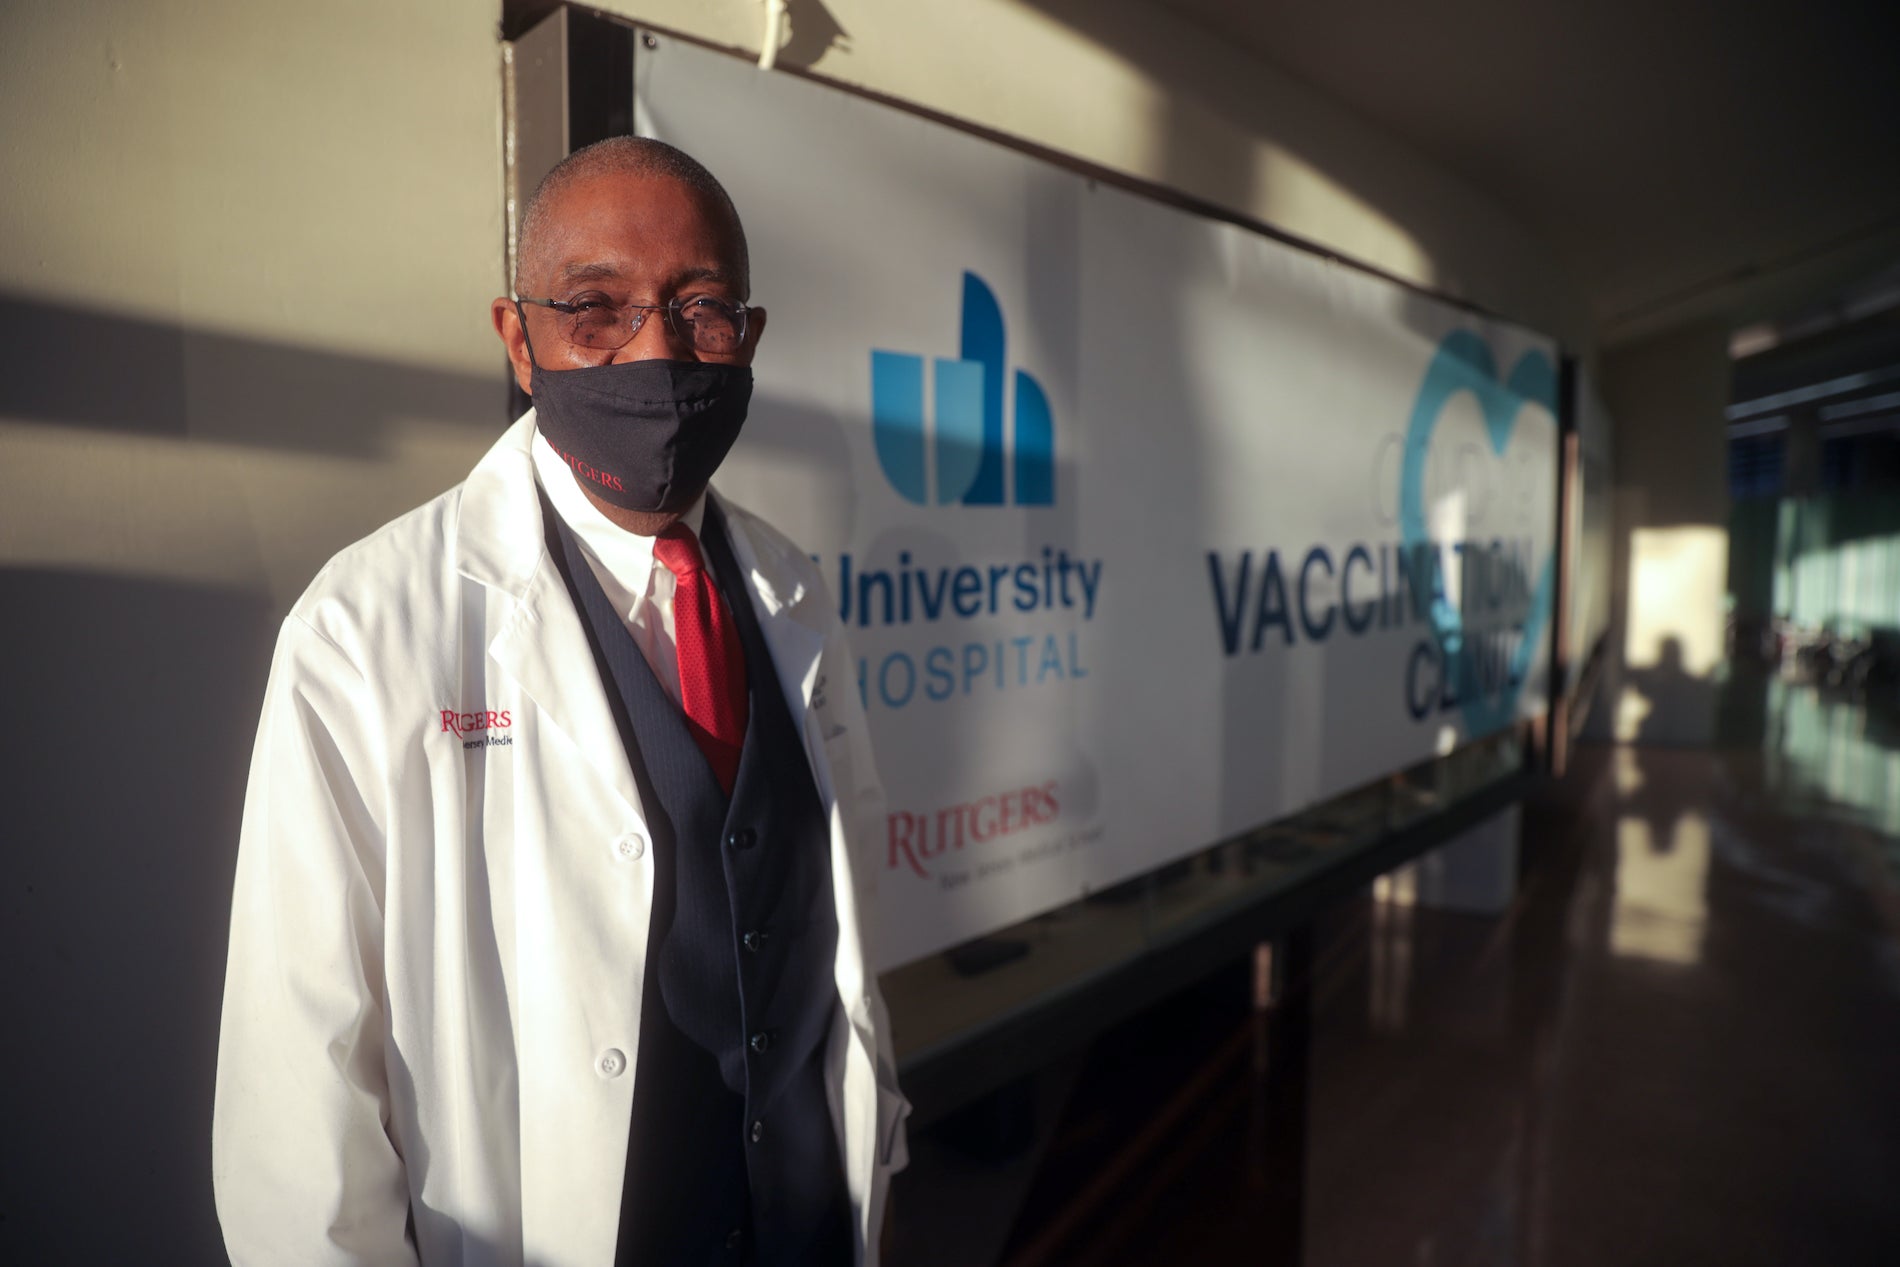 Robert Johnson, dean of Rutgers New Jersey Medical School. (Photo by Erico Rovayo)